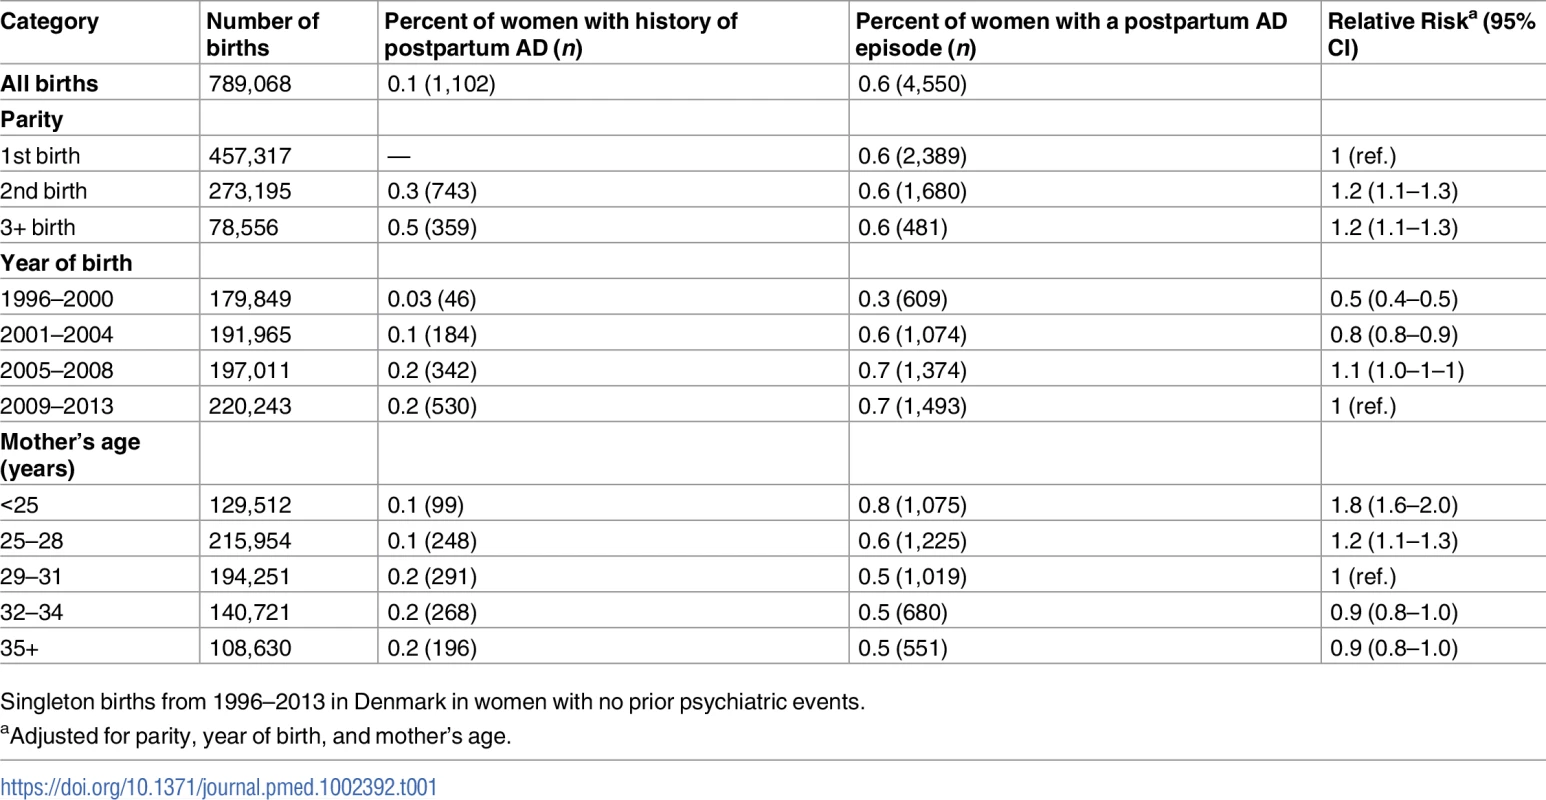 Risk of postpartum affective disorder (AD)—Distribution of number of births, women with prior history of postpartum AD, and postpartum AD episodes according to parity, year of birth, and age.